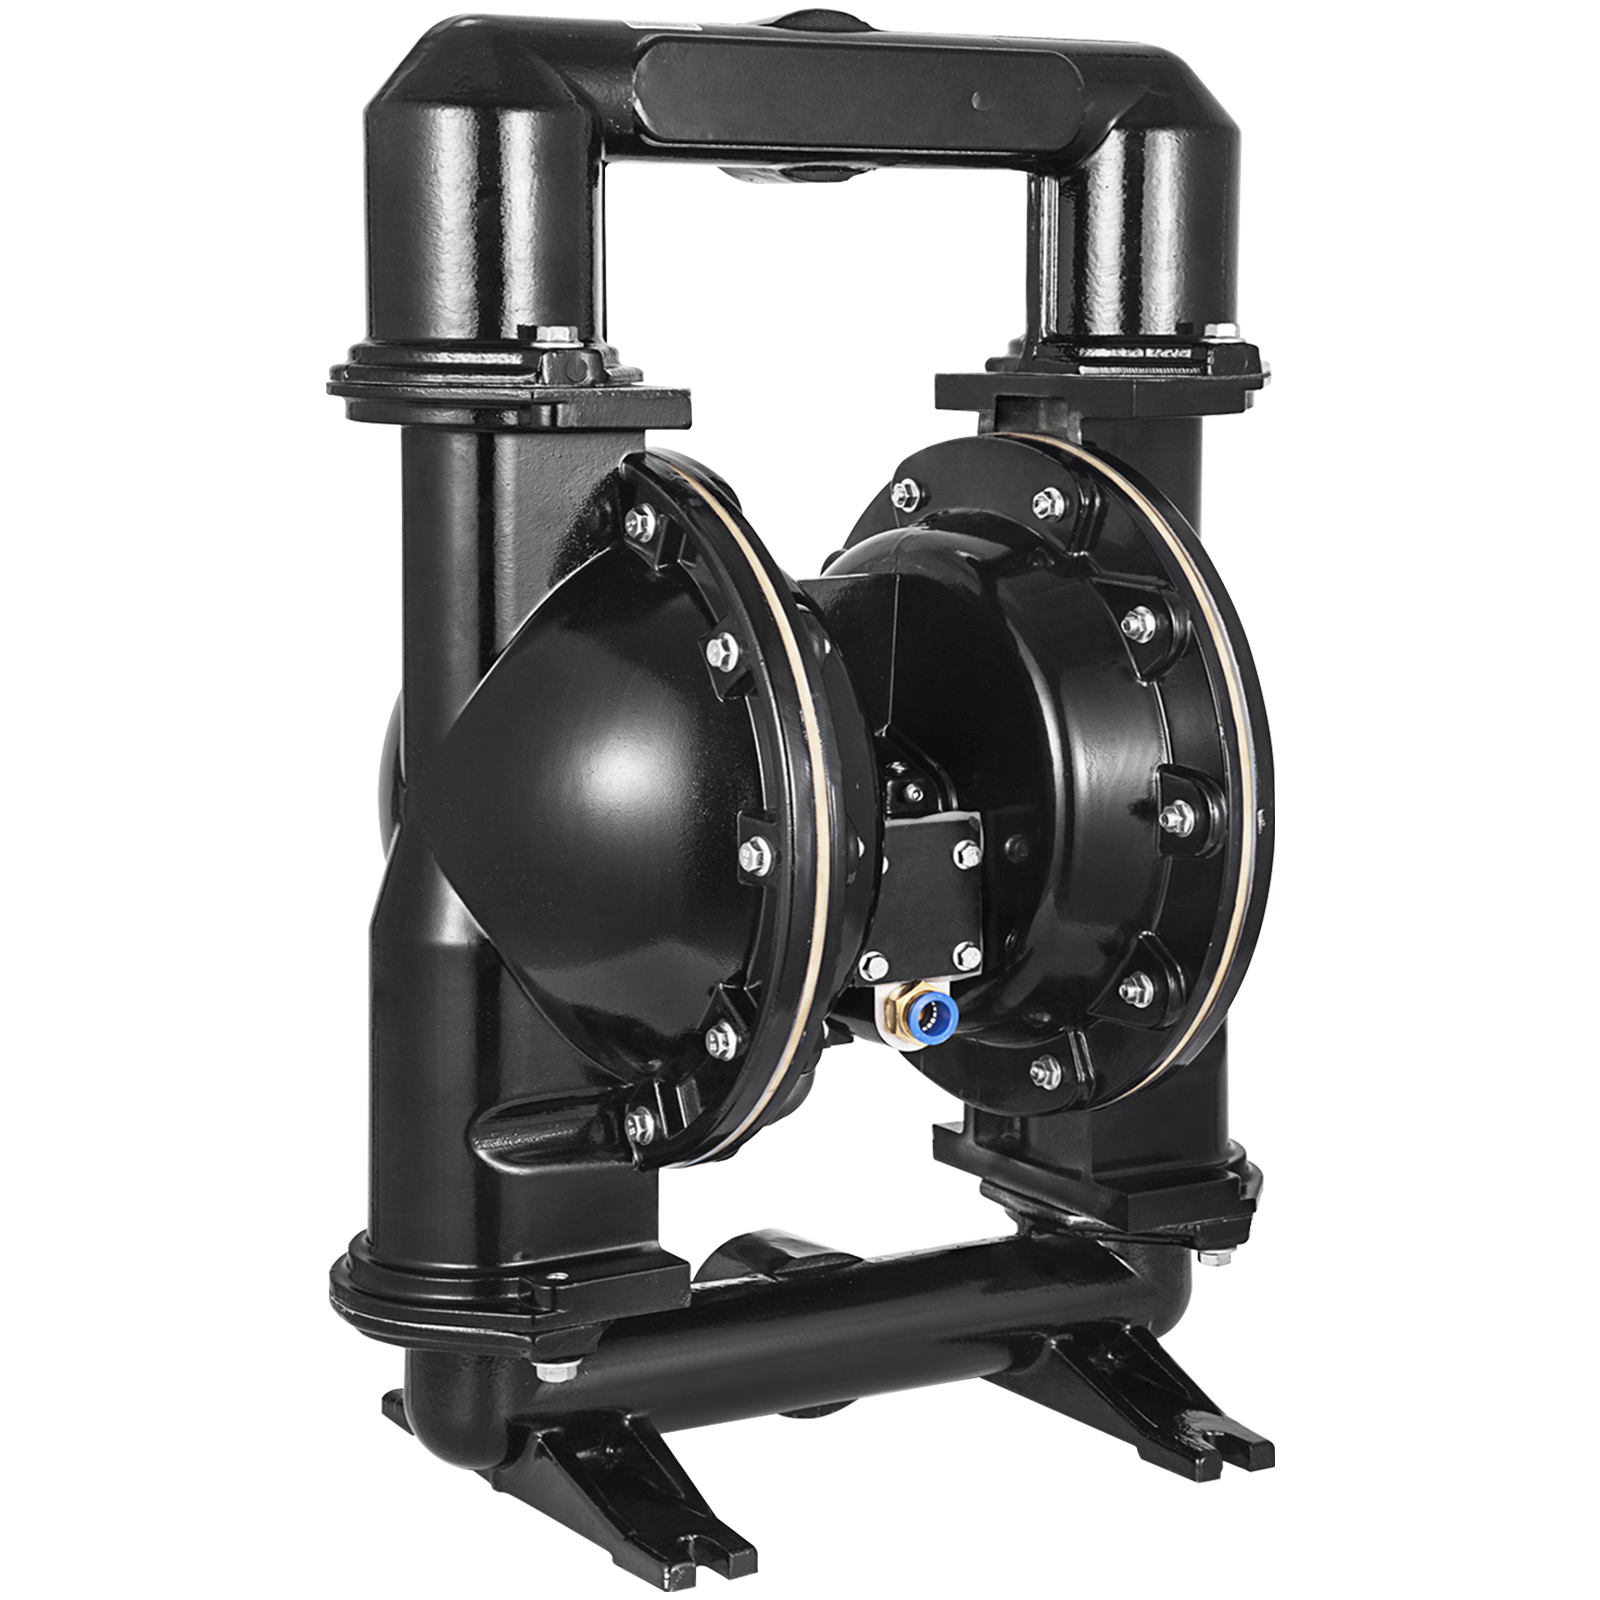 VEVOR Air-Operated Double Diaphragm Pump, 2 inch Inlet & Outlet